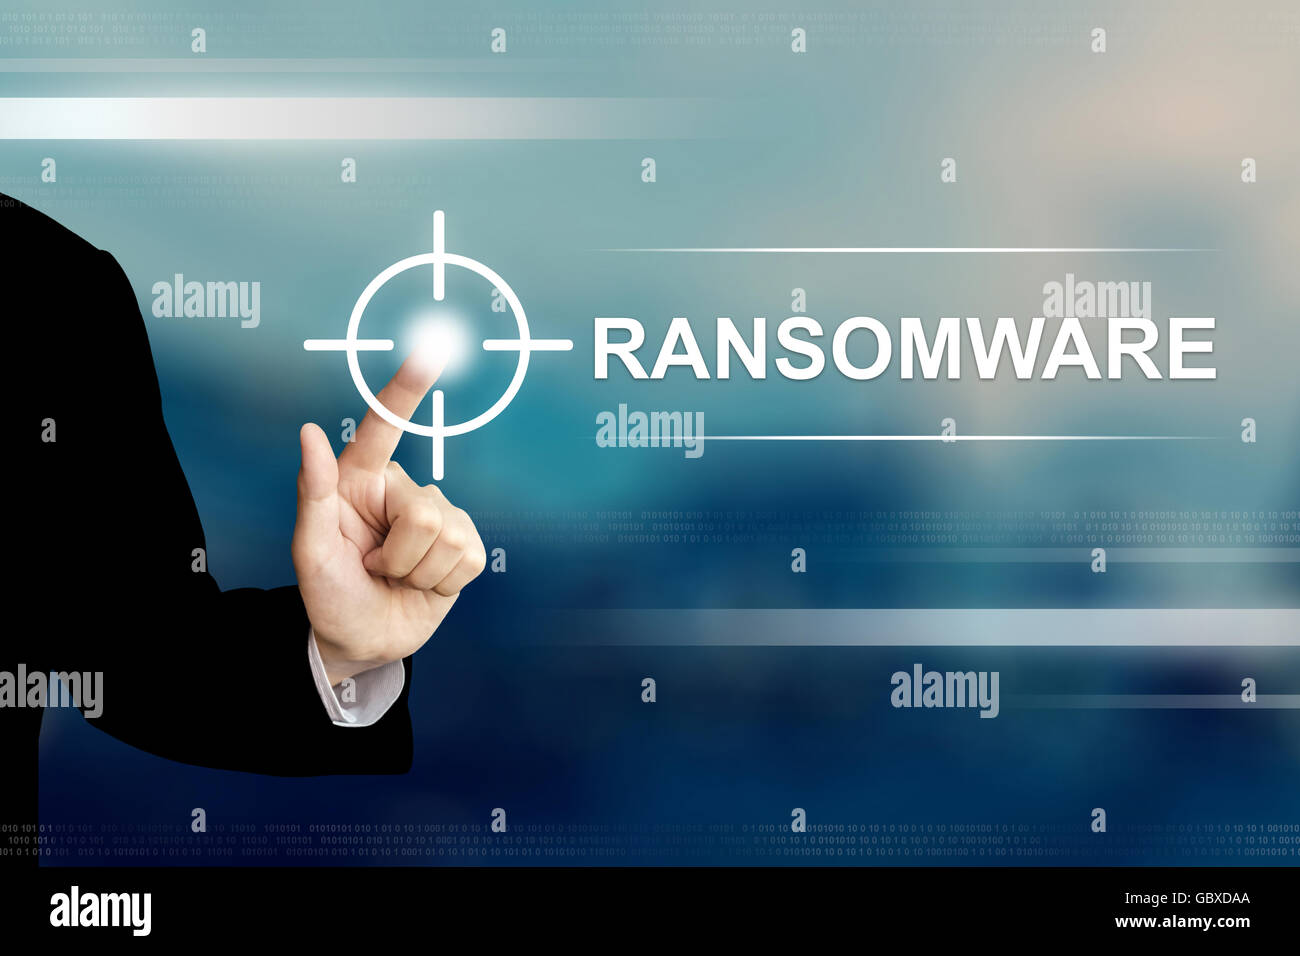 business hand pushing ransomware button on a touch screen interface Stock Photo